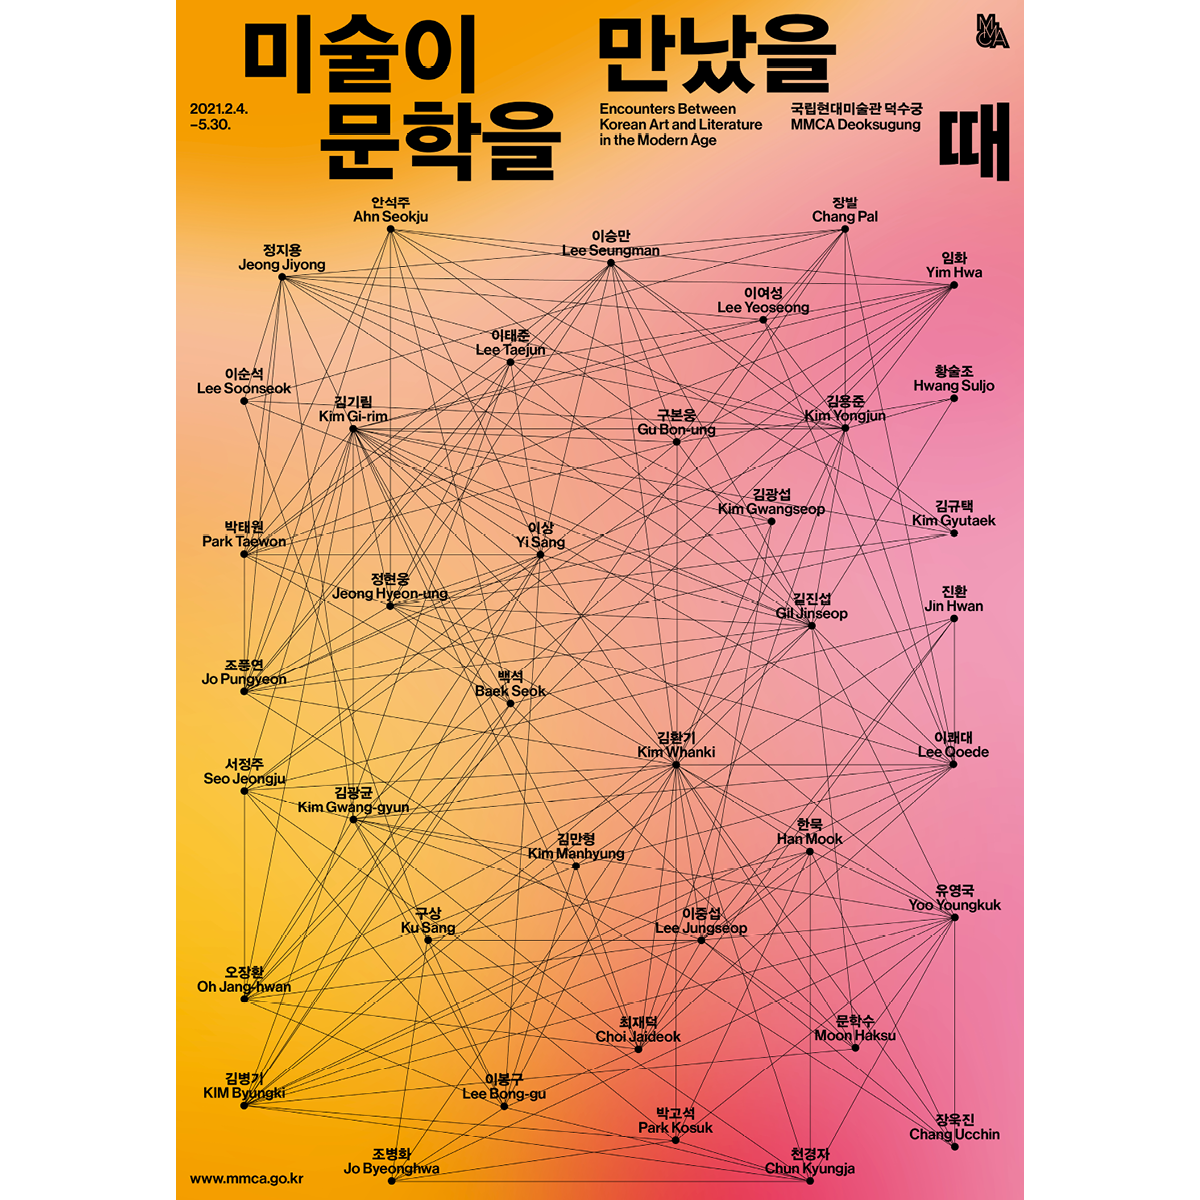 Encounters Between Korean Art and Literature in the Modern Age